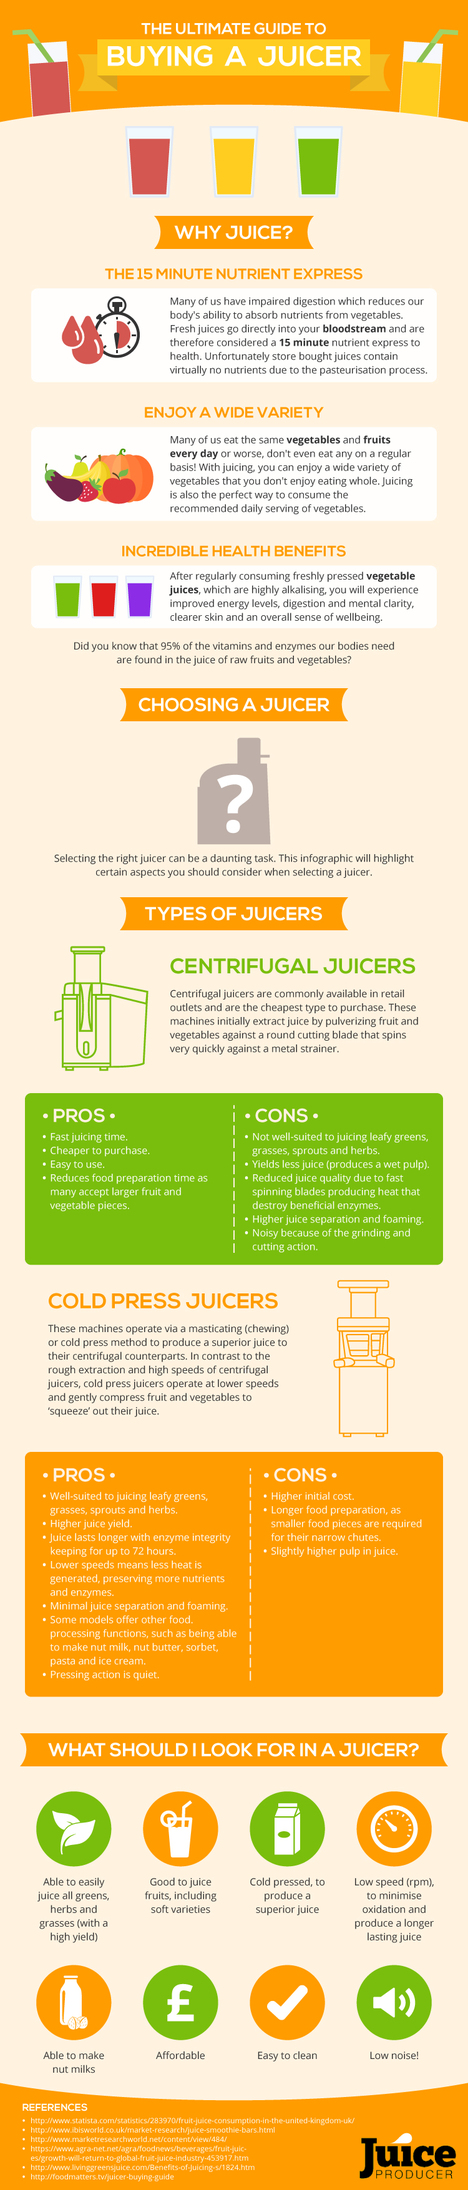 The Ultimate Guide to Buying a Juicer